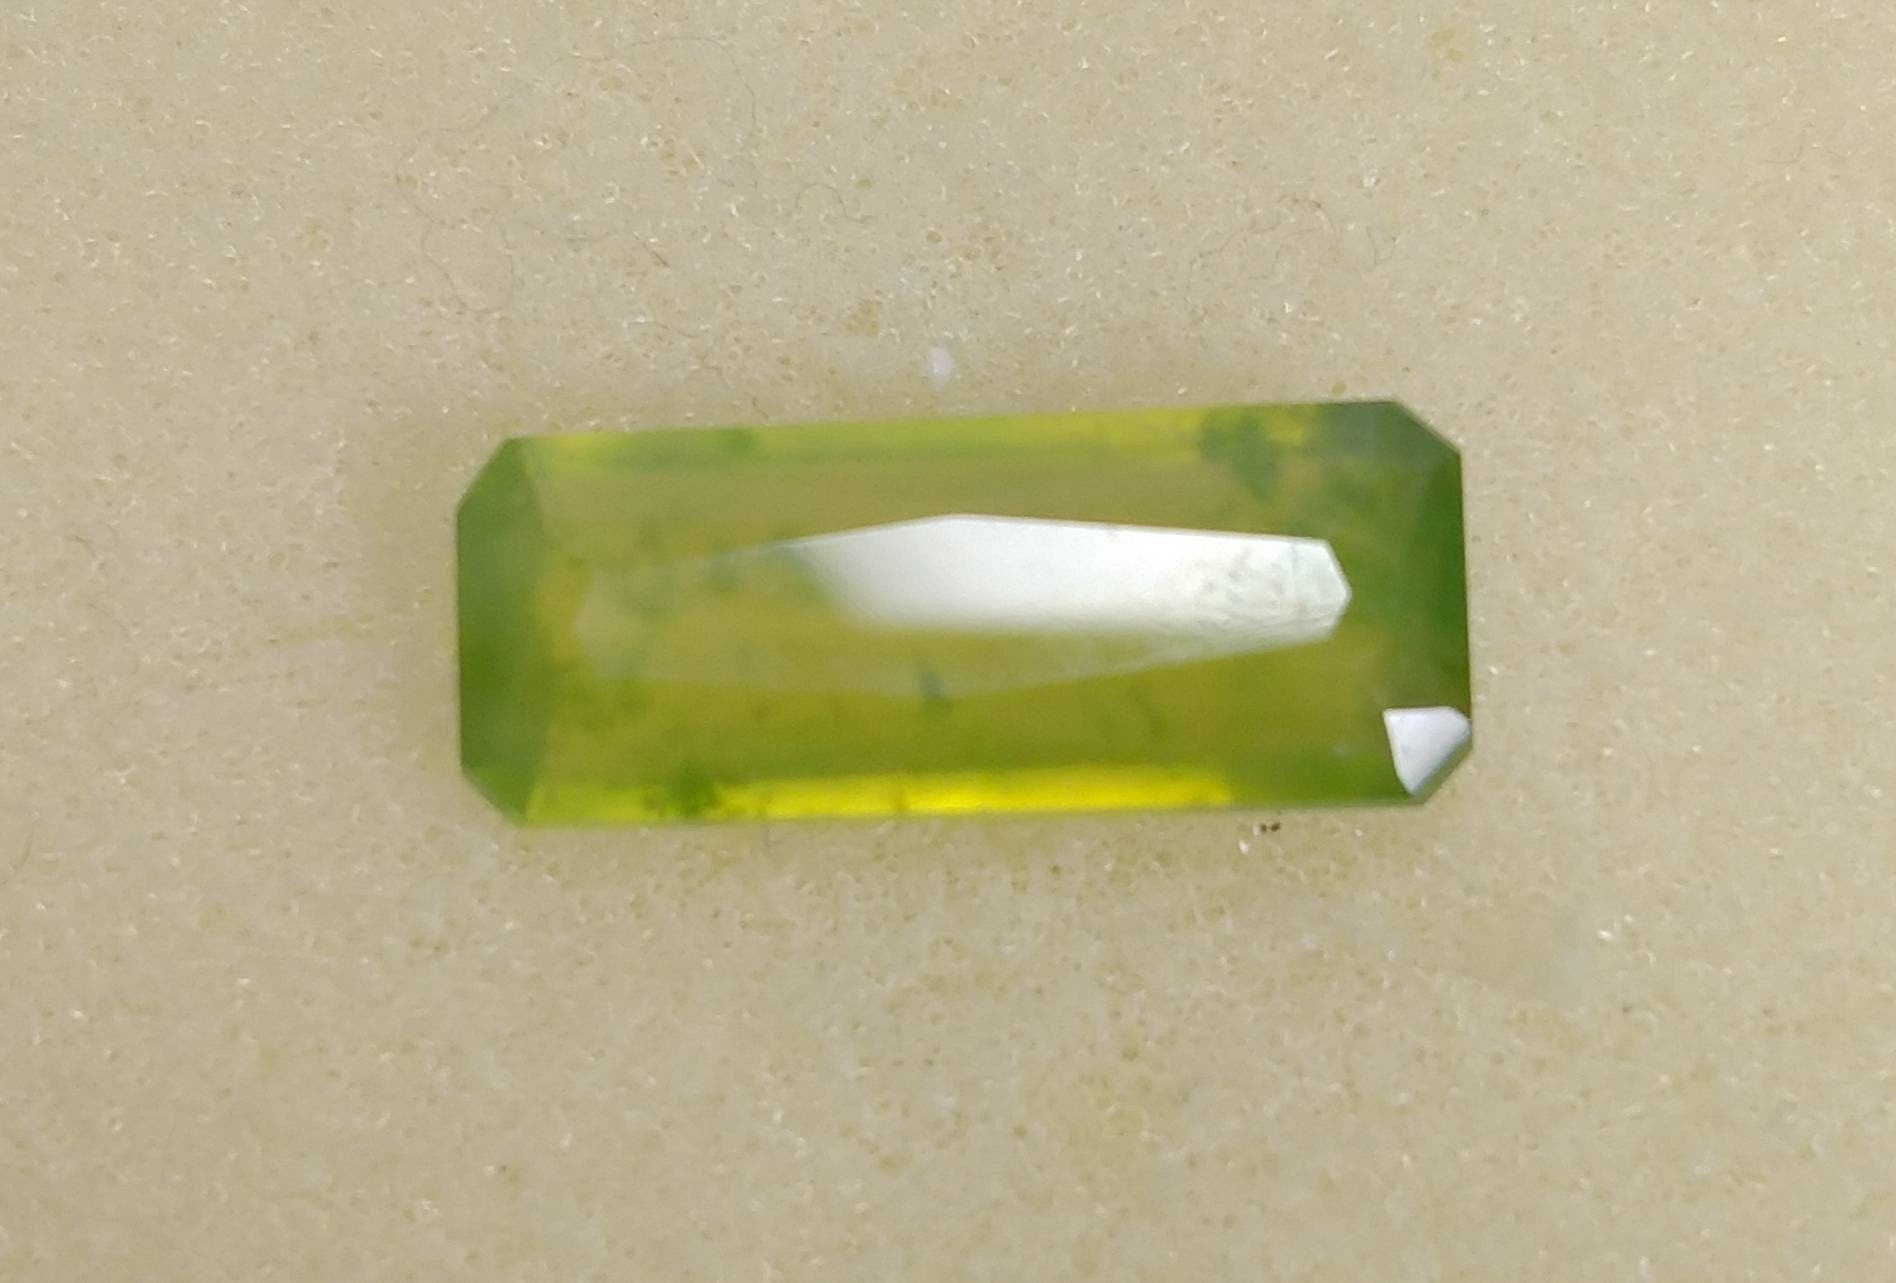 ARSAA GEMS AND MINERALSNatural top quality beautiful 6 carats radiant shape faceted hydrograssular green garnet gem - Premium  from ARSAA GEMS AND MINERALS - Just $14.00! Shop now at ARSAA GEMS AND MINERALS